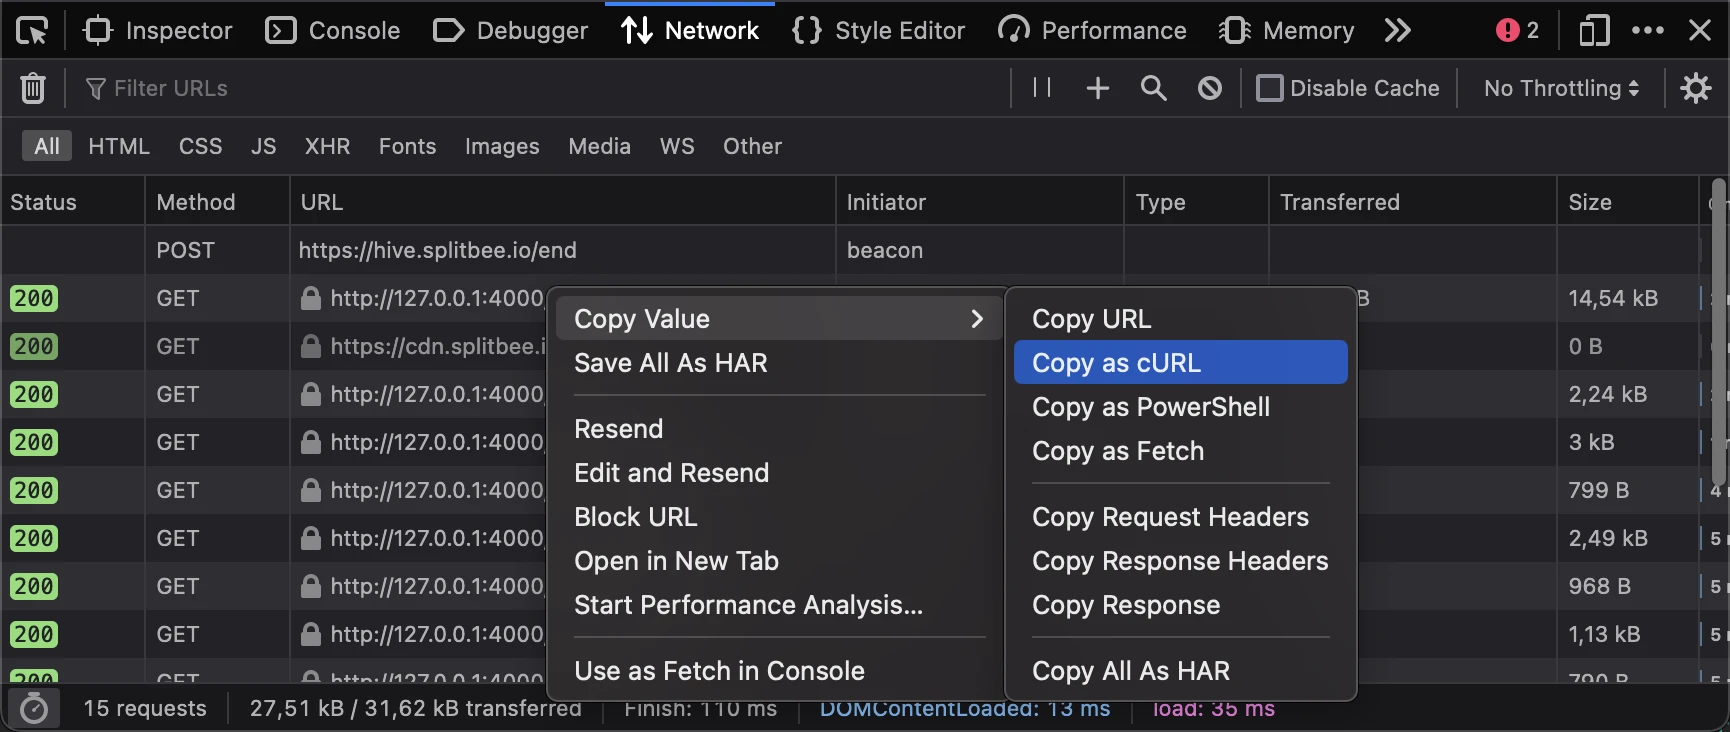 The "Copy as curl" option in the Firefox developer tools